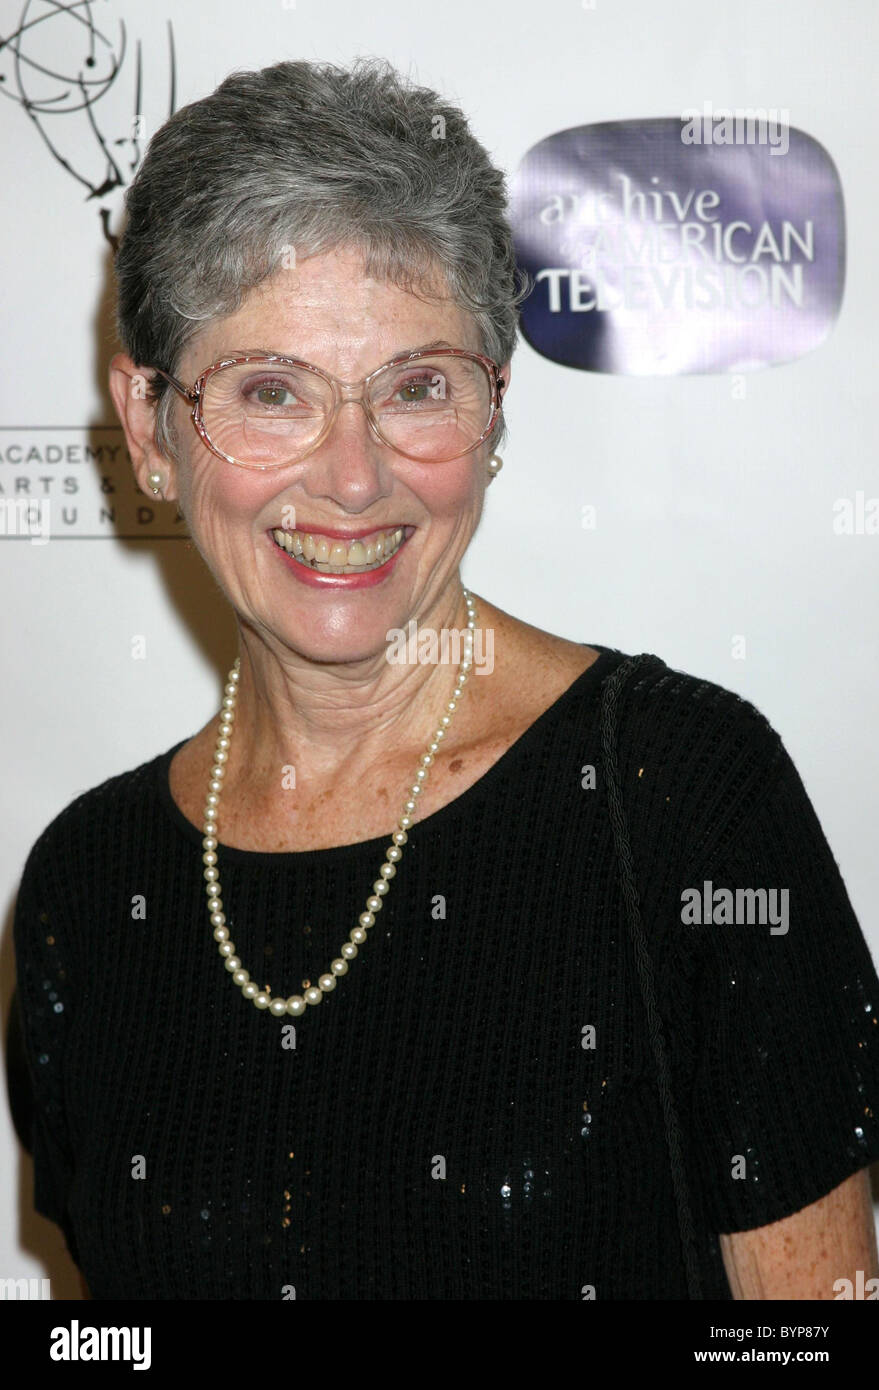 Elinor Donahue 10th Anniversary of the Archive of the American TV held at the Crustacean Restaurant Beverly Hills, California - Stock Photo